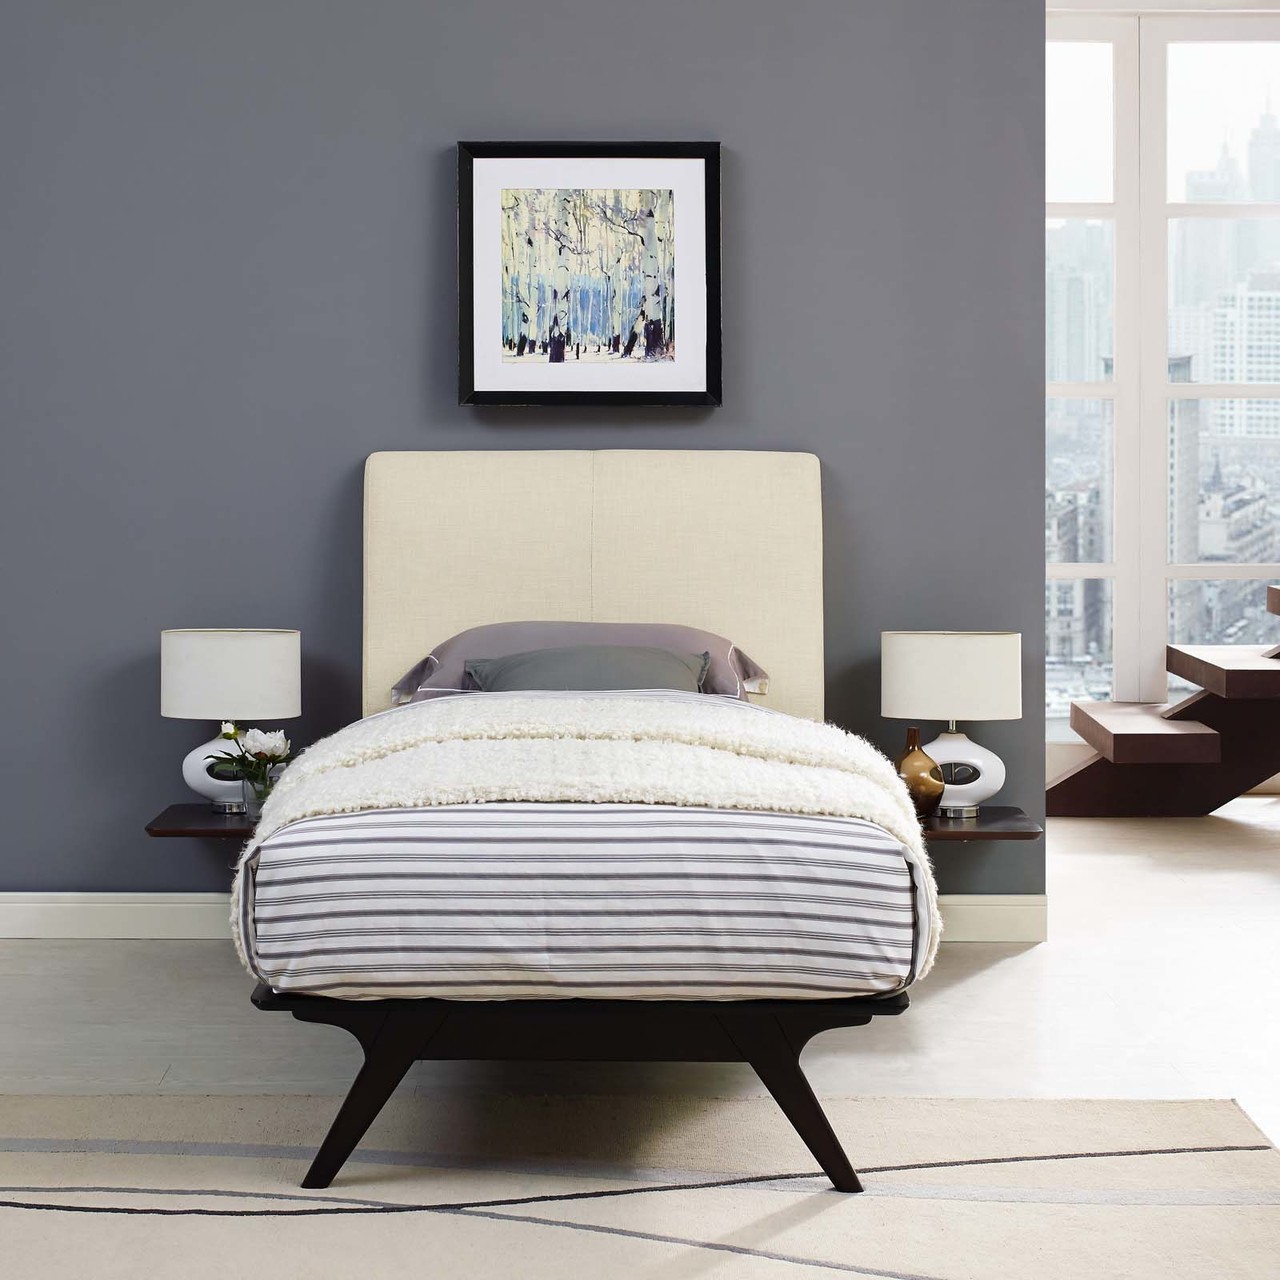 What A Minimalistic Bedroom Set Can Do For Your Living Space